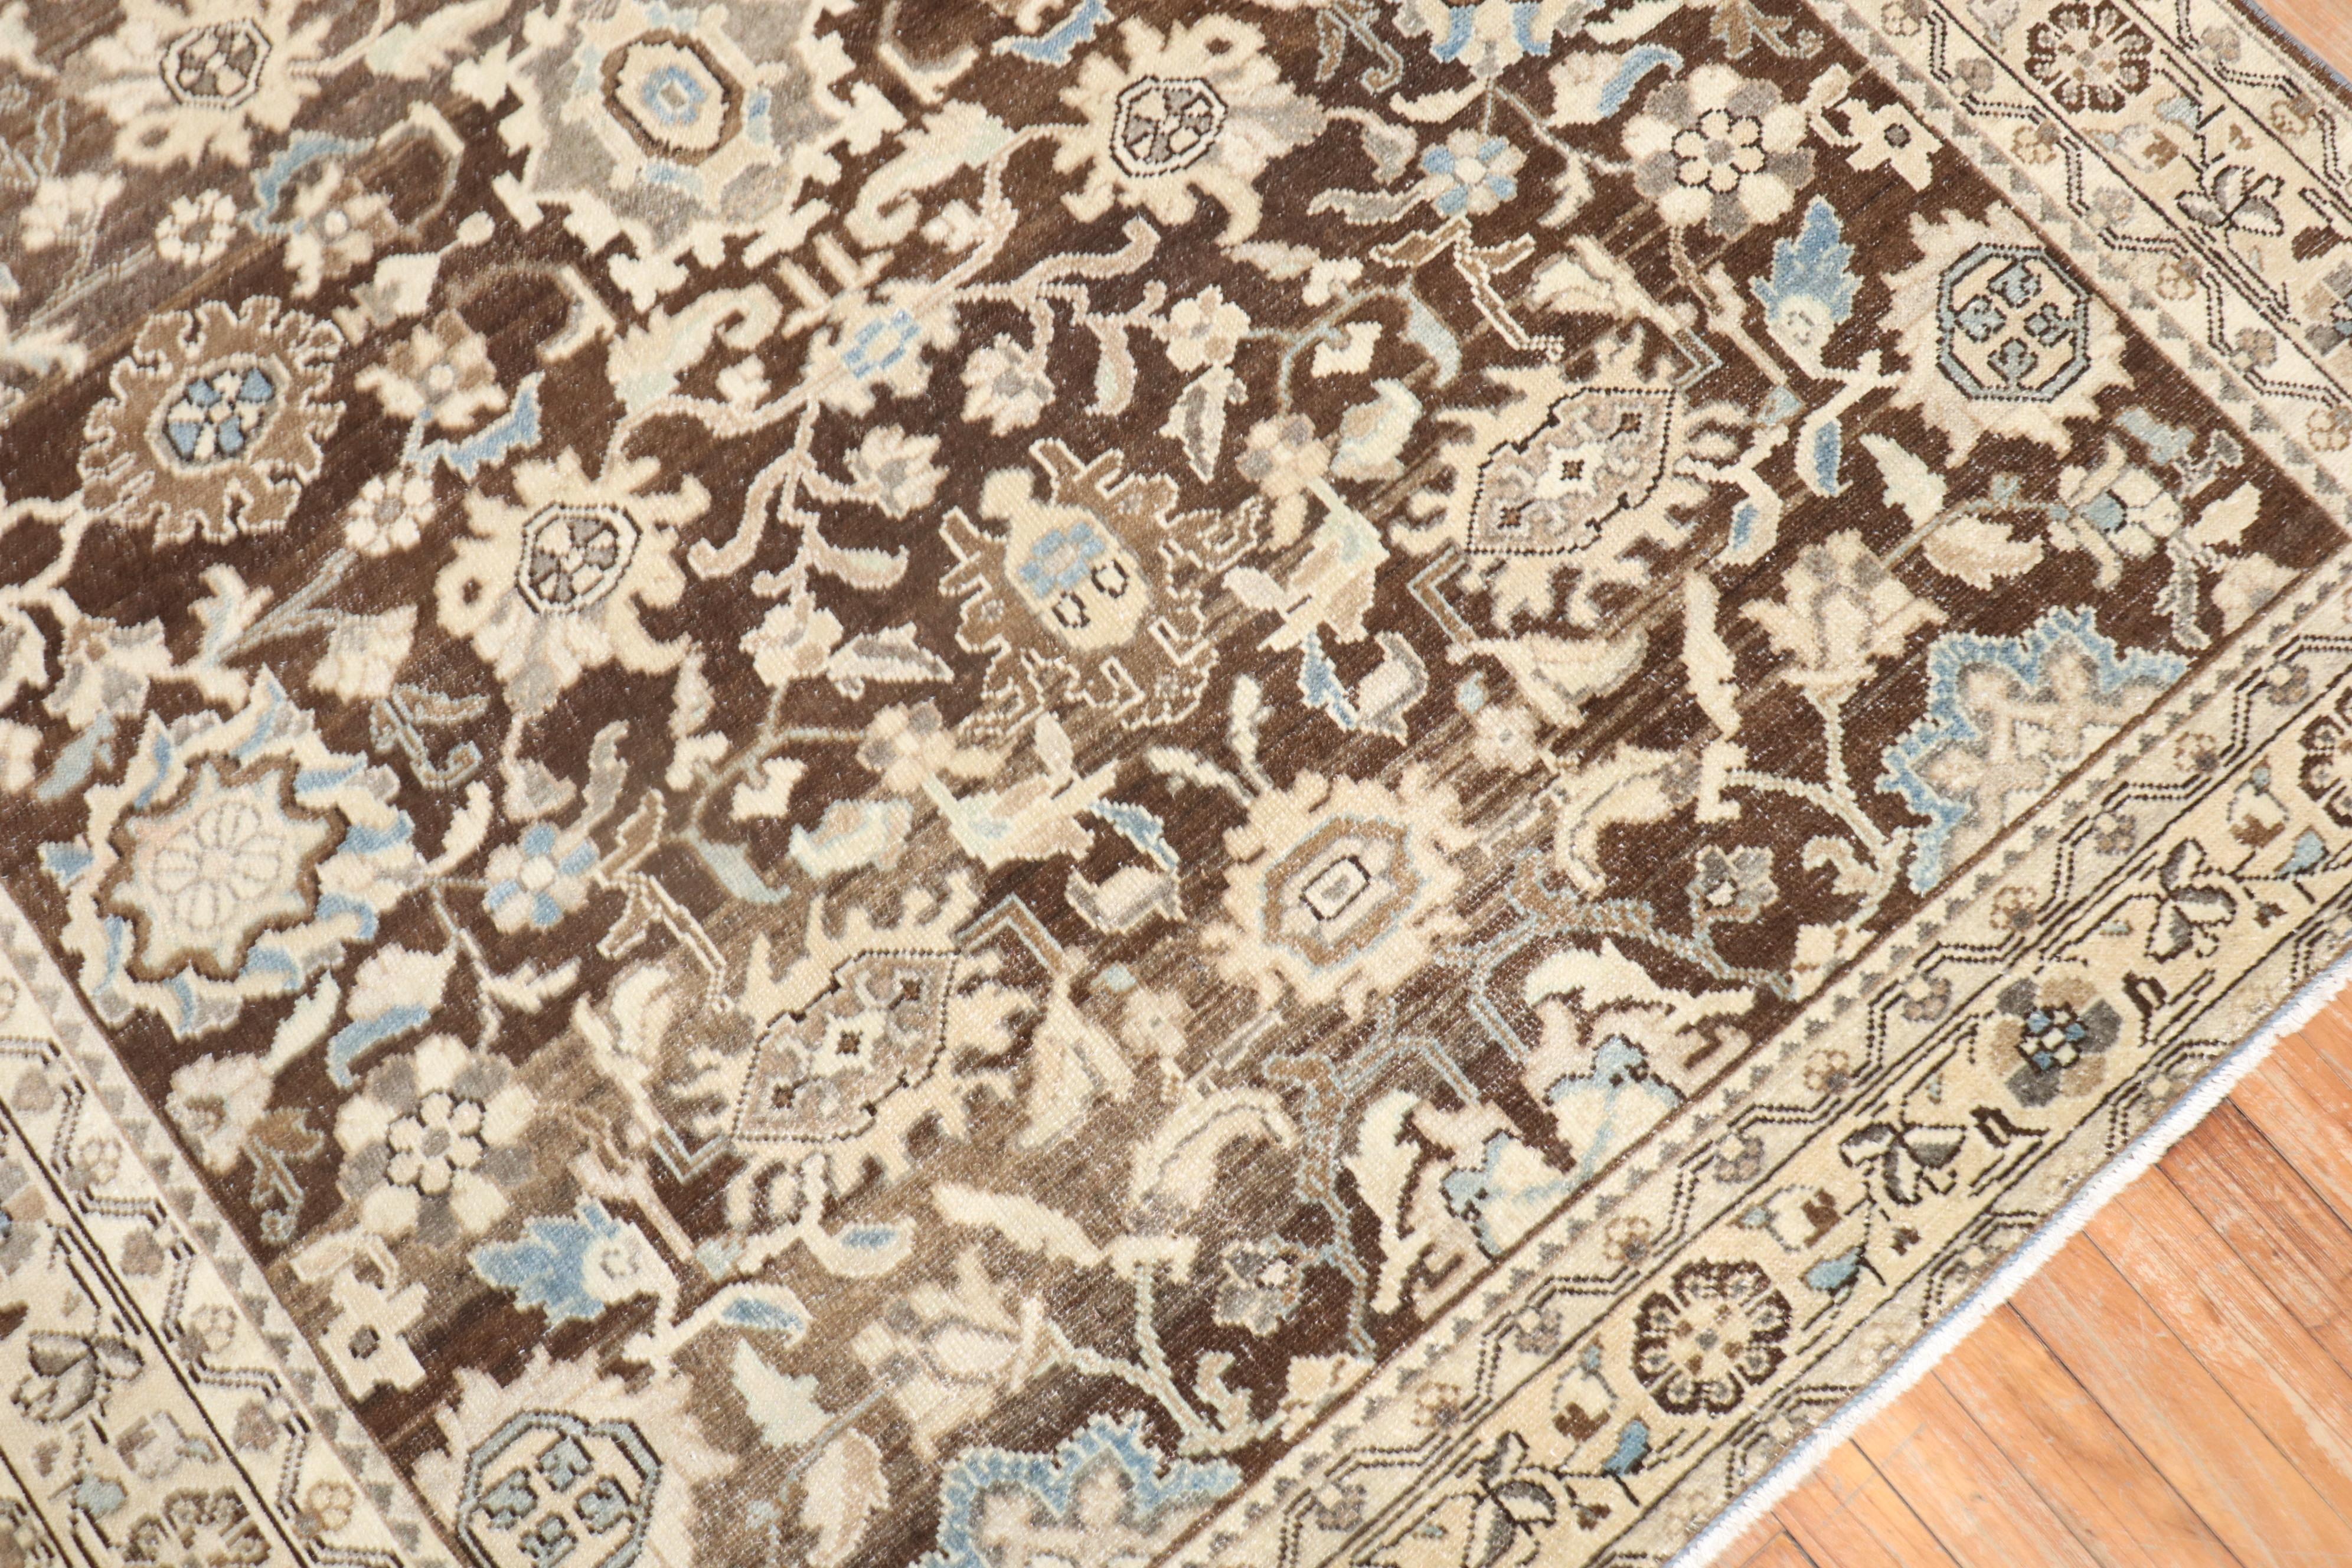 An antique Persian Malayer Rug from 2nd quarter of the 20th century with a chocolate brown ground

Rug no. j2550
Size 5'6